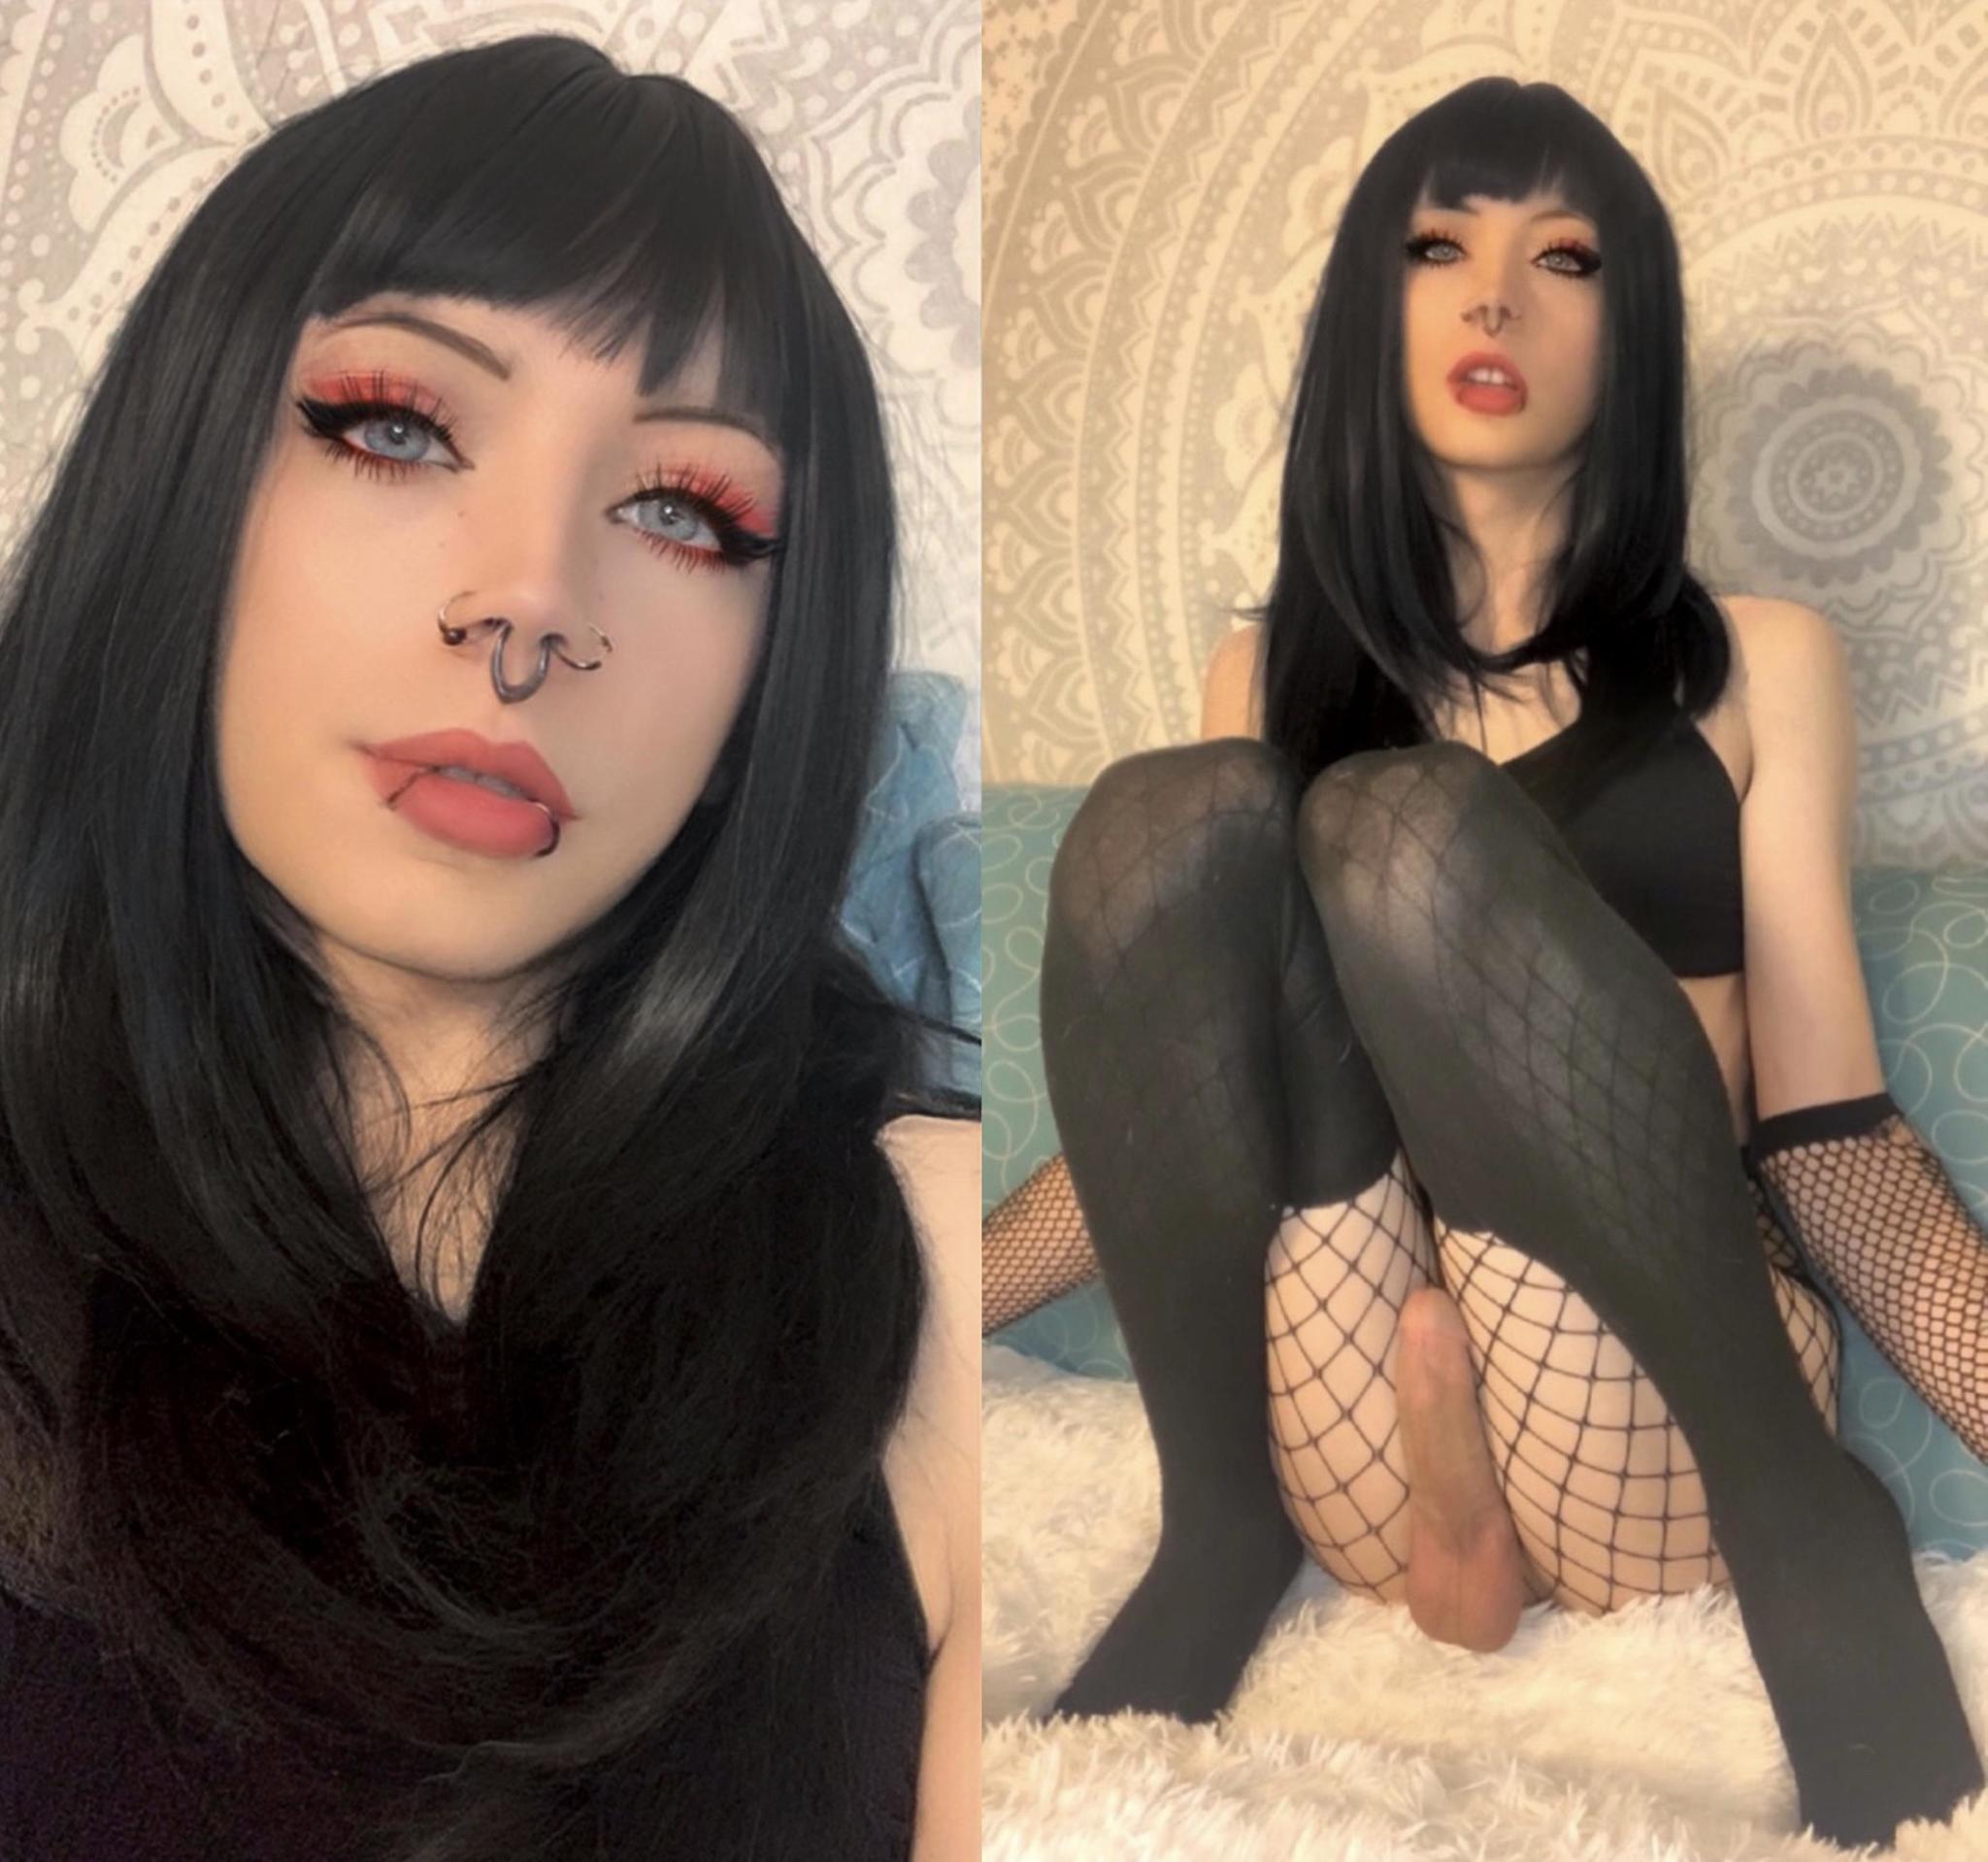 U / skyesoprettyy compilation (watch out! Very long post) - NSFW, Its a trap!, Erotic, Booty, Penis, Anus, Stockings, Ahegao, Trap IRL, Knee socks, Tights, Goths, Without underwear, Nudity, Mitts, Gaiters, Femboy, A selection, Collar, Choker, Longpost